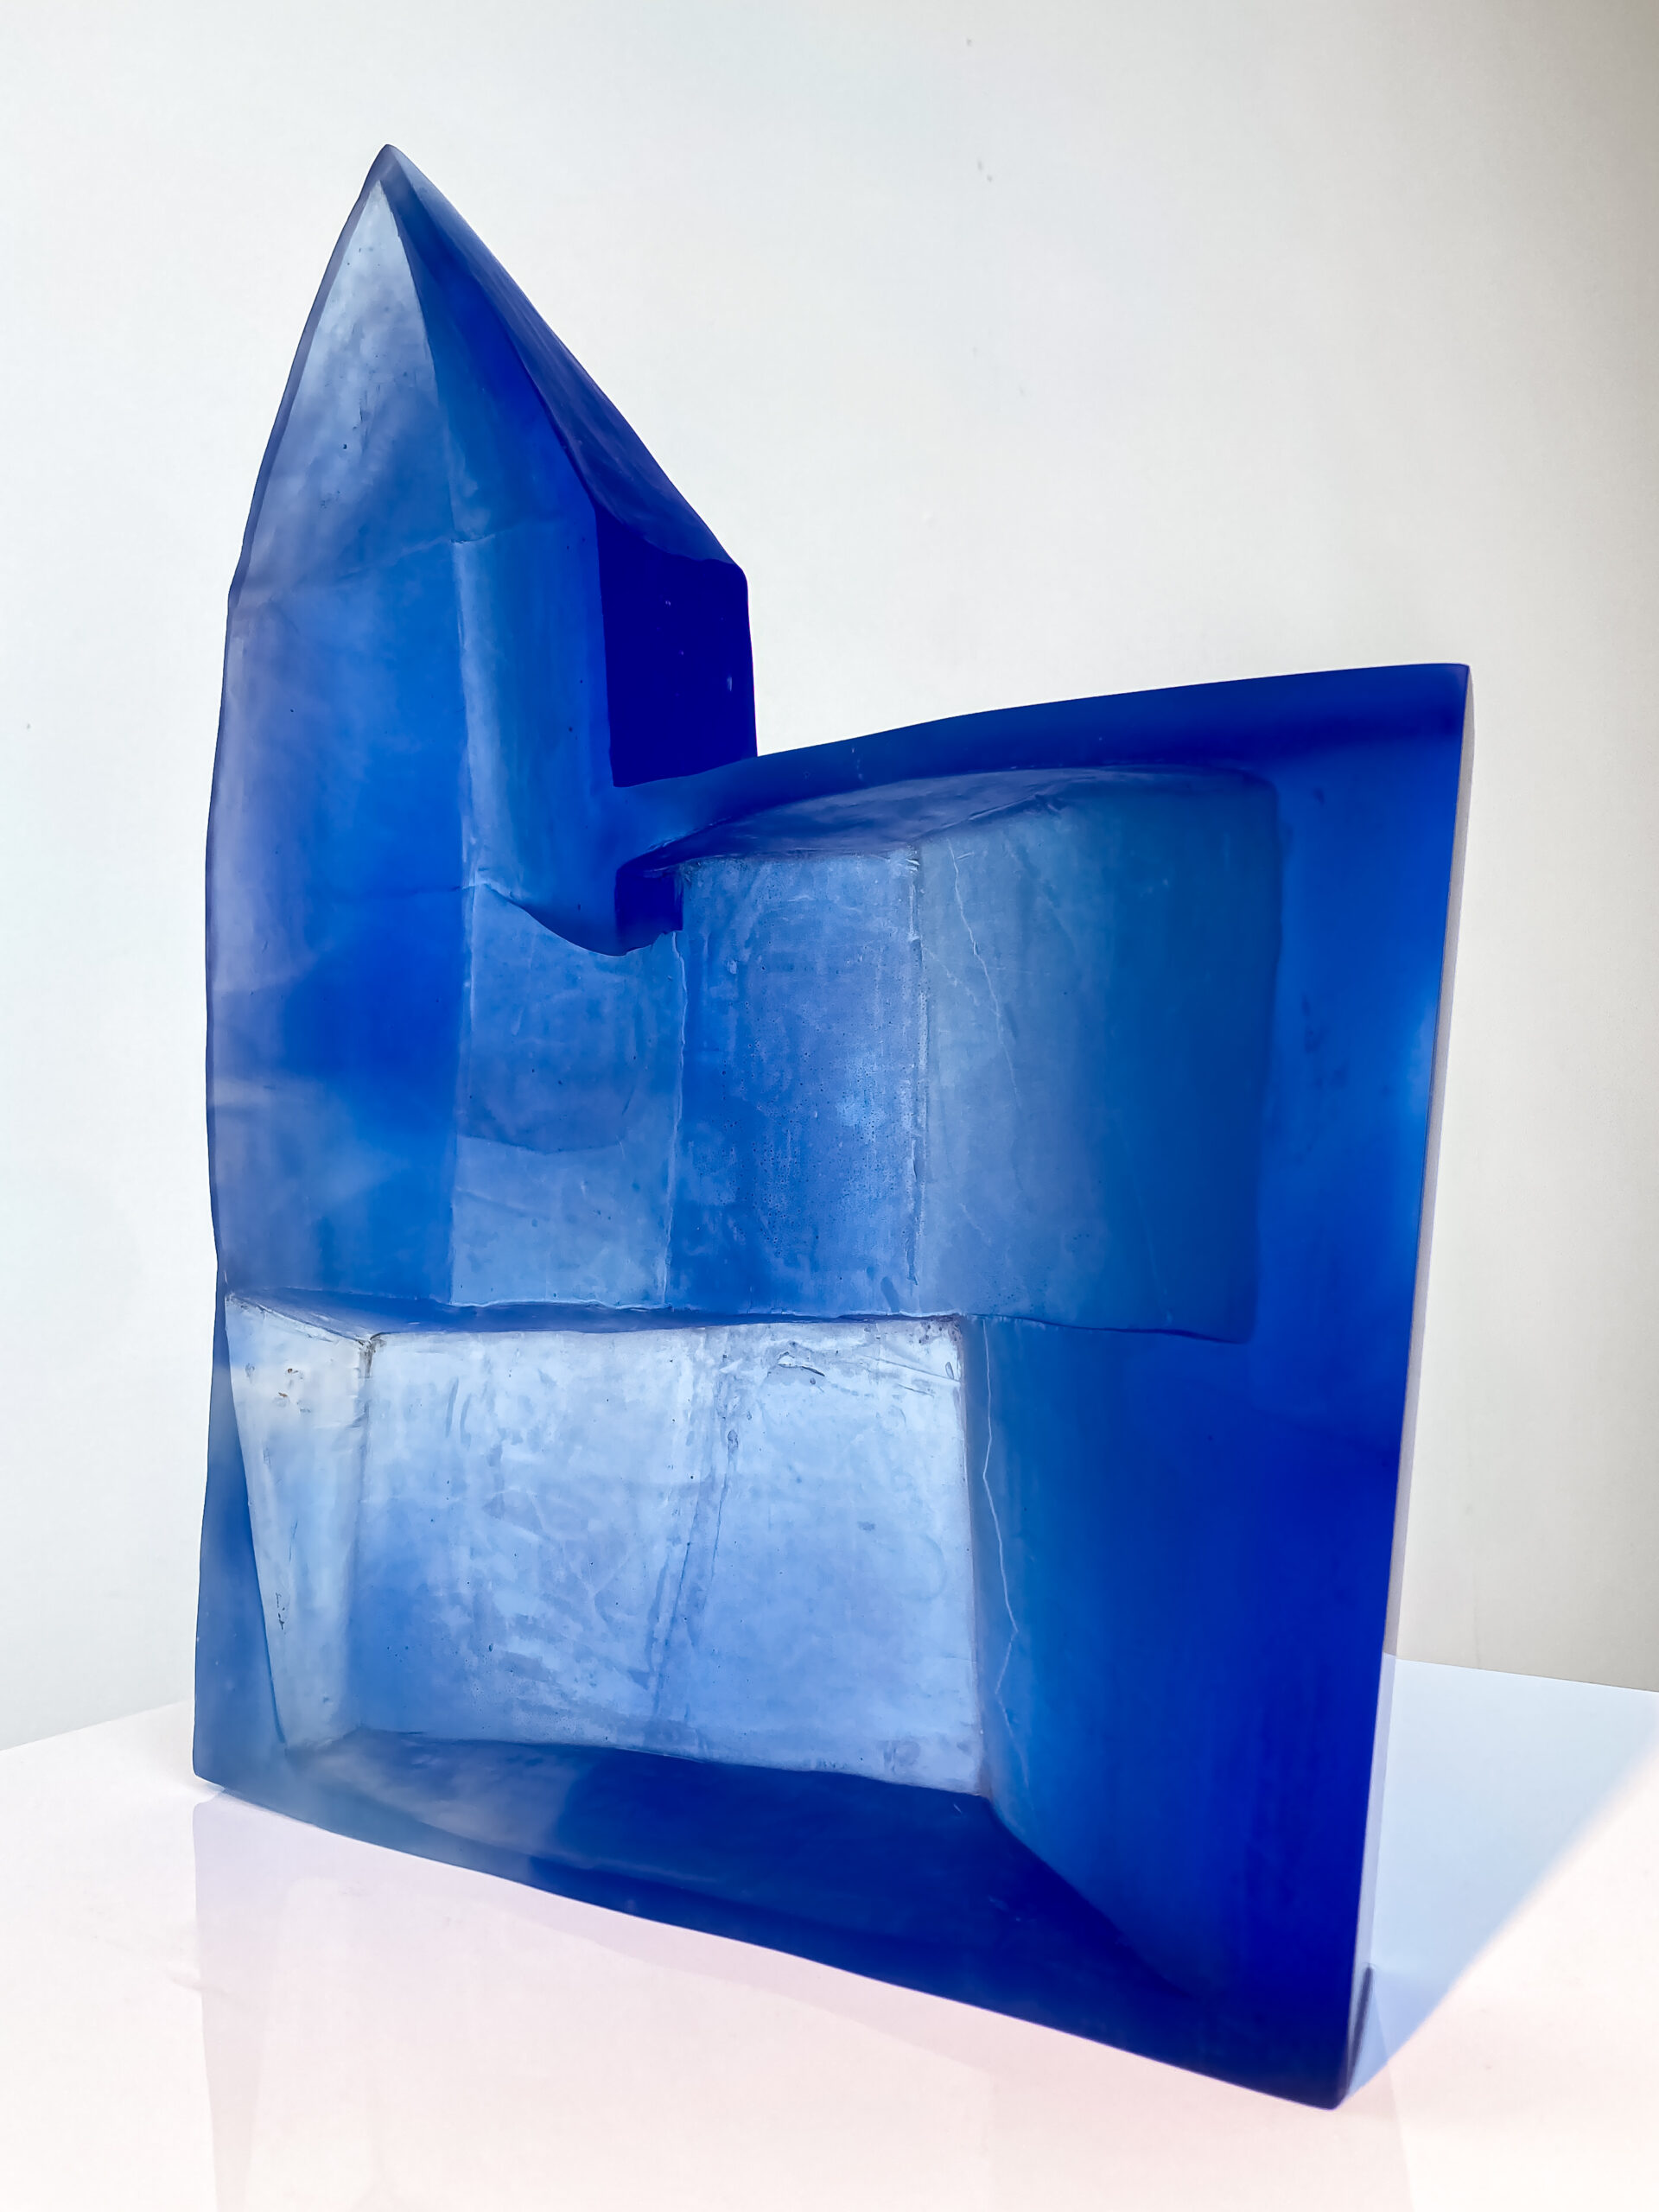 A striking blue cast glass sculpture with many facets and angles